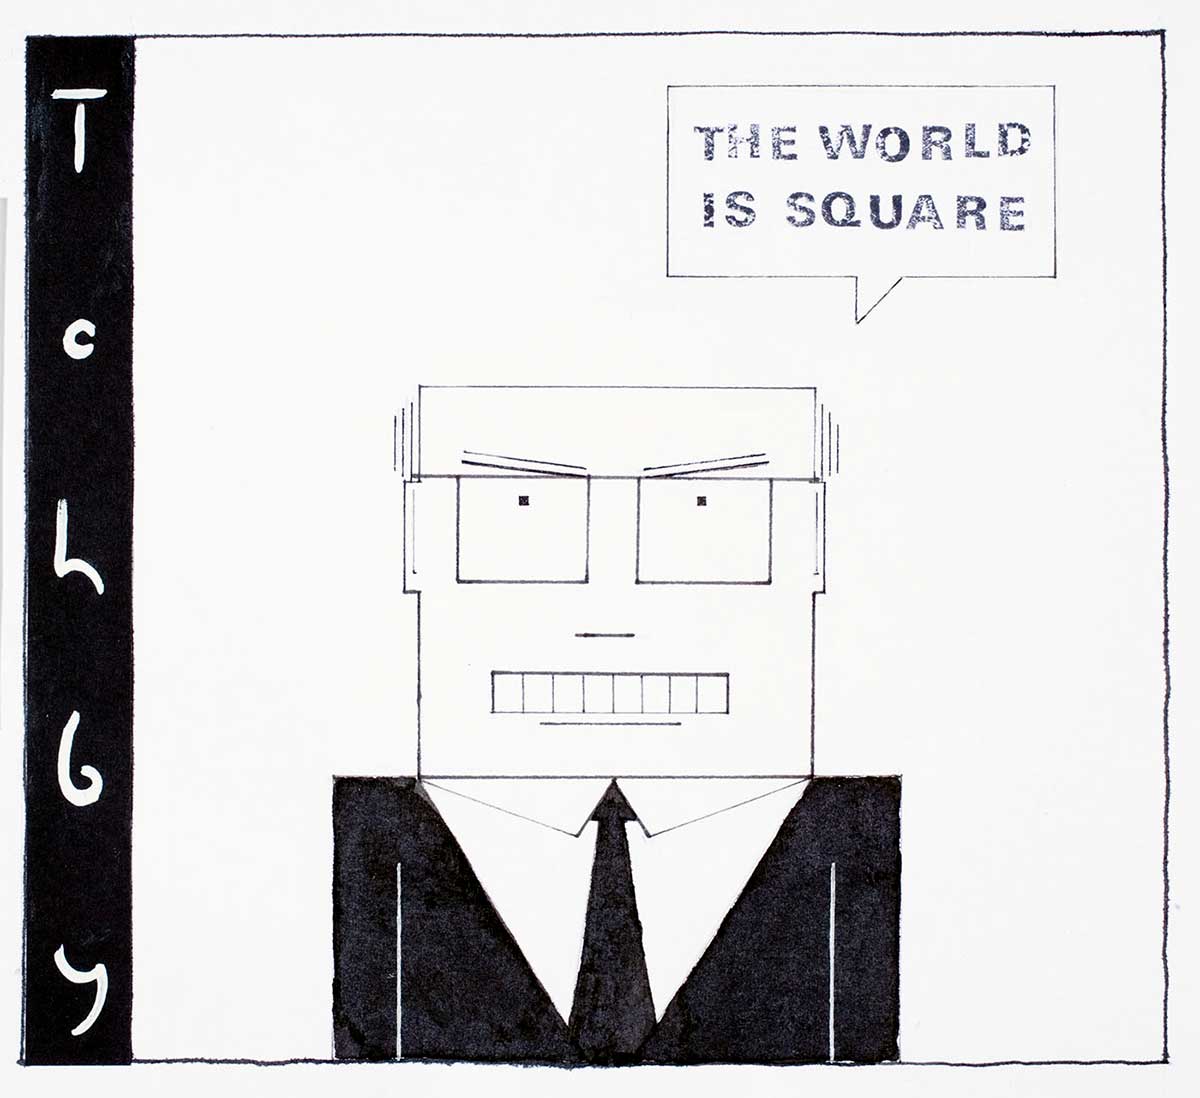 Political cartoon image of John Howard with a square head, glasses, mouth, teeth and body stating that 'The world is square'. - click to view larger image